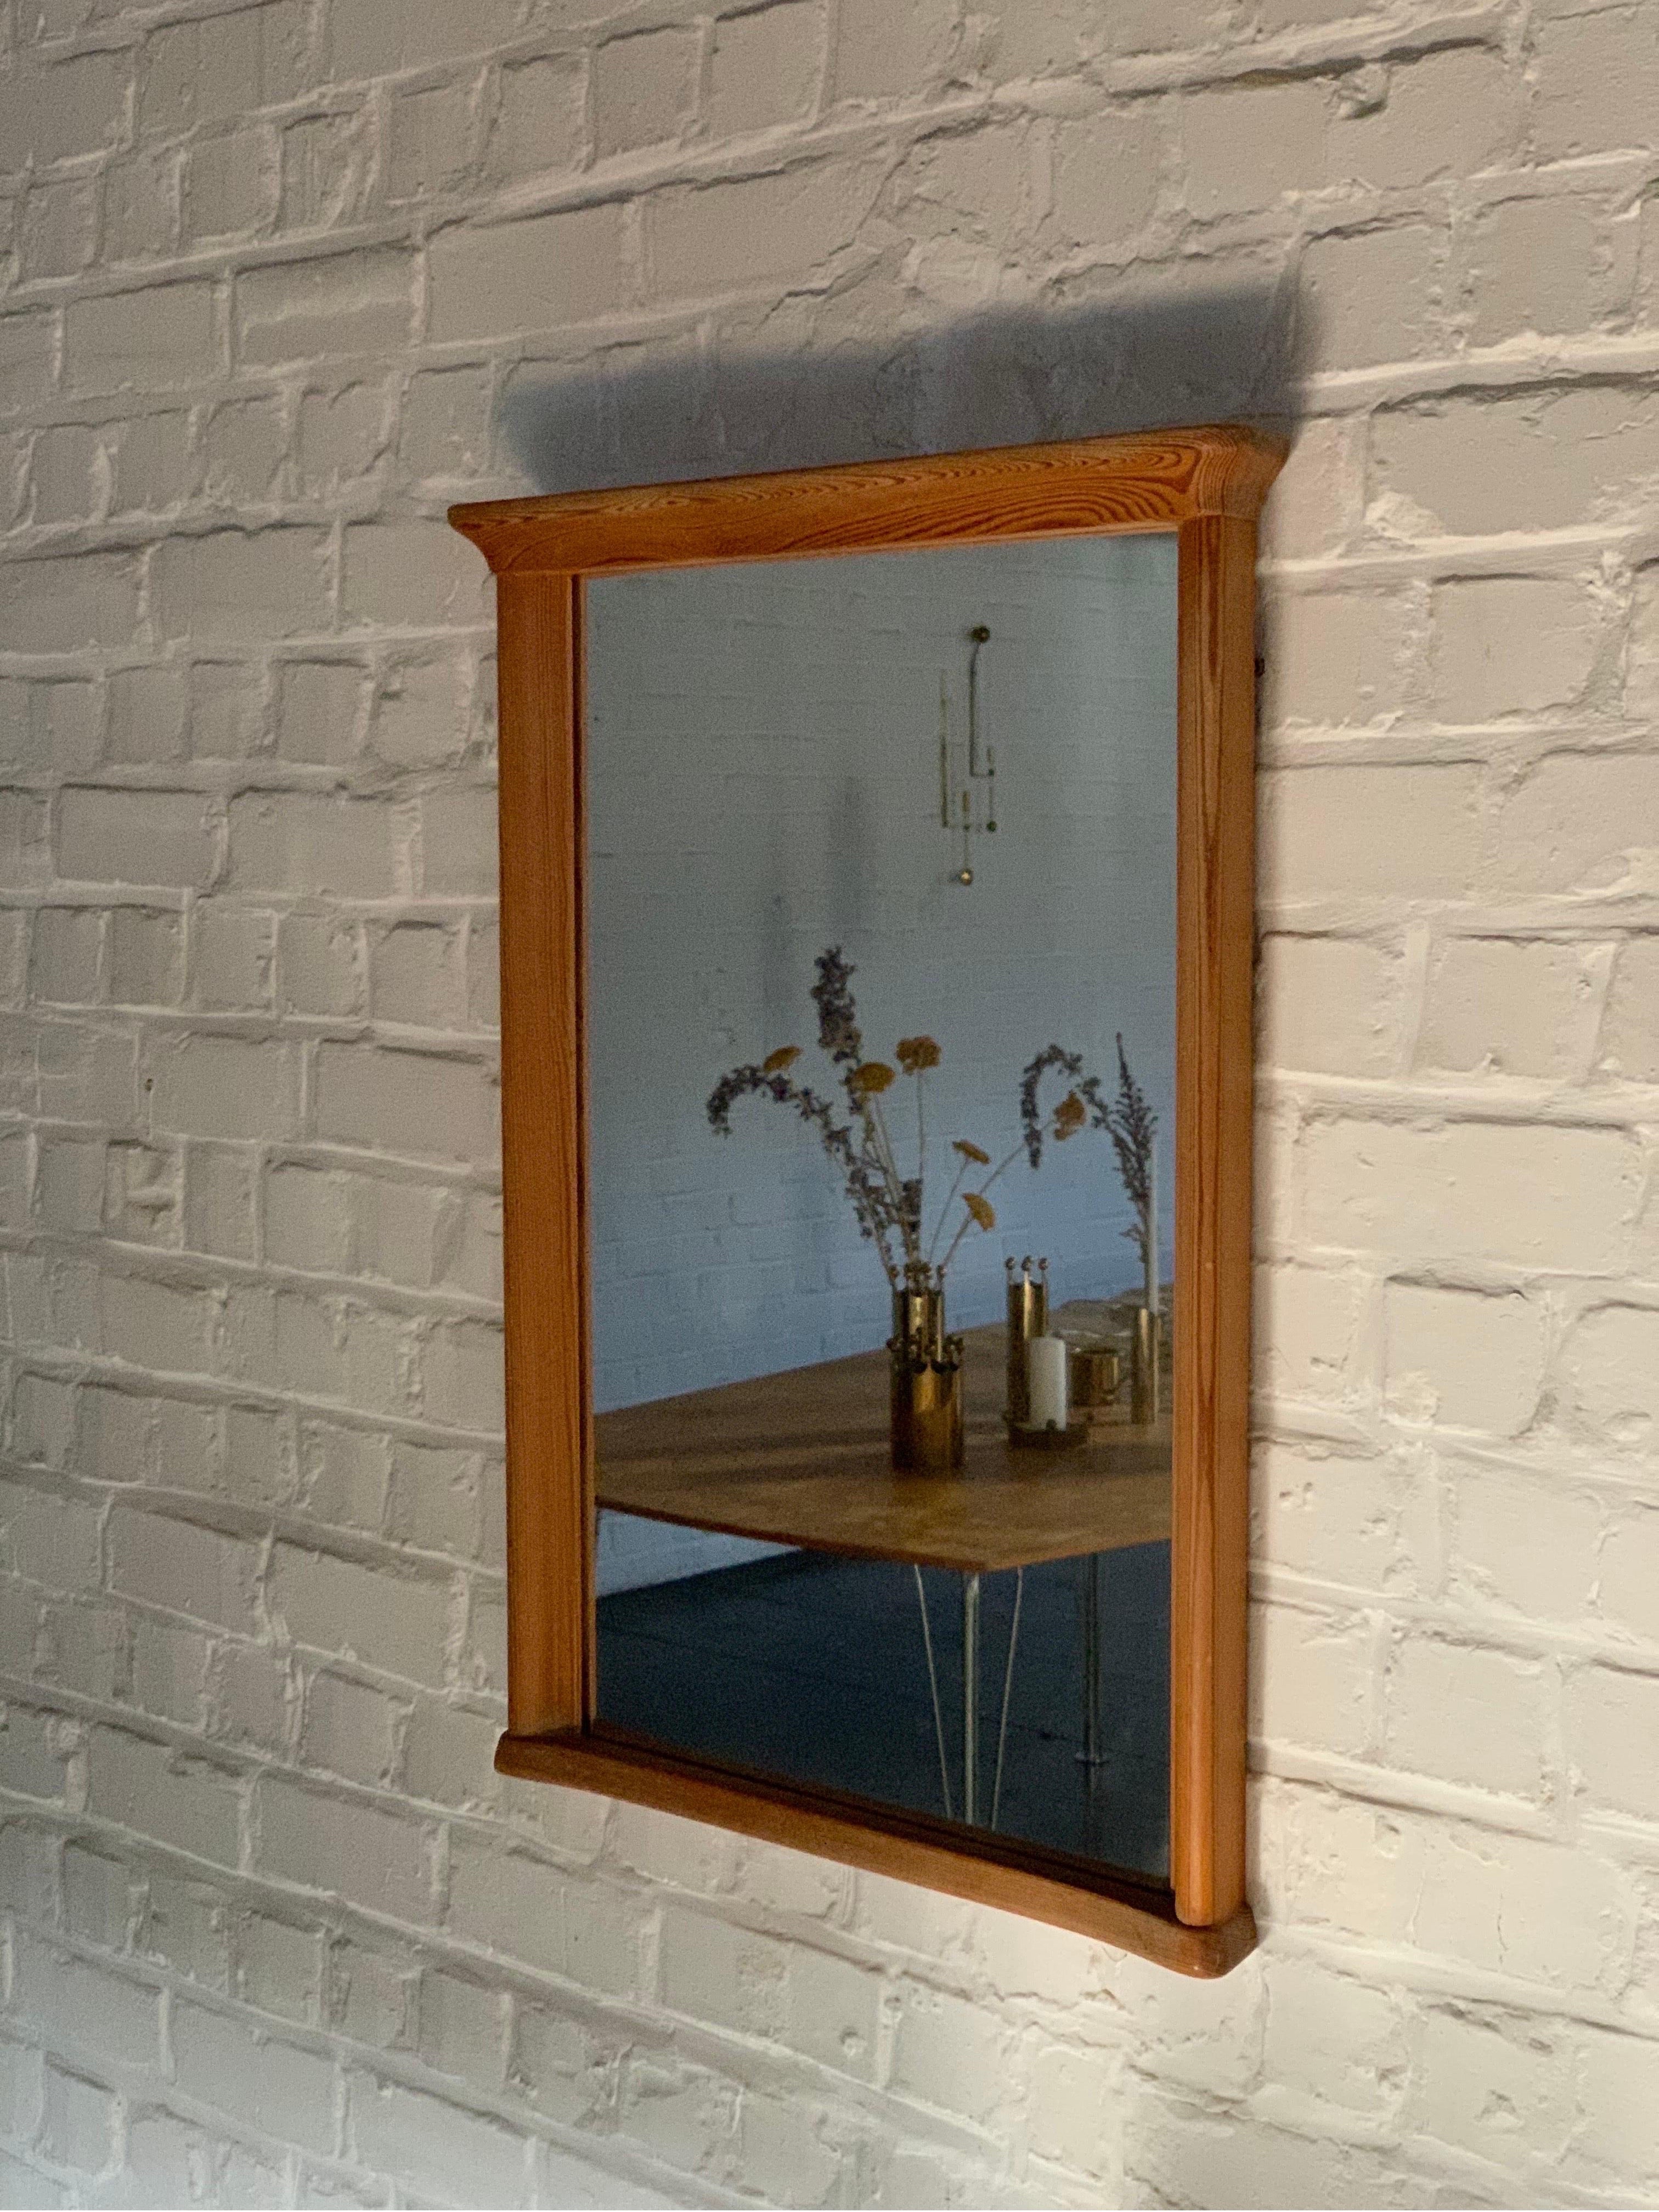 This is an unusual wall pine mirror. Produced in Sweden around the 1940s. It is a so unique in the shape. It will brighten any projects. We just cleaned it and waxed it. Branded with Carl Malmsten signature at the back. Only two screws are necessary